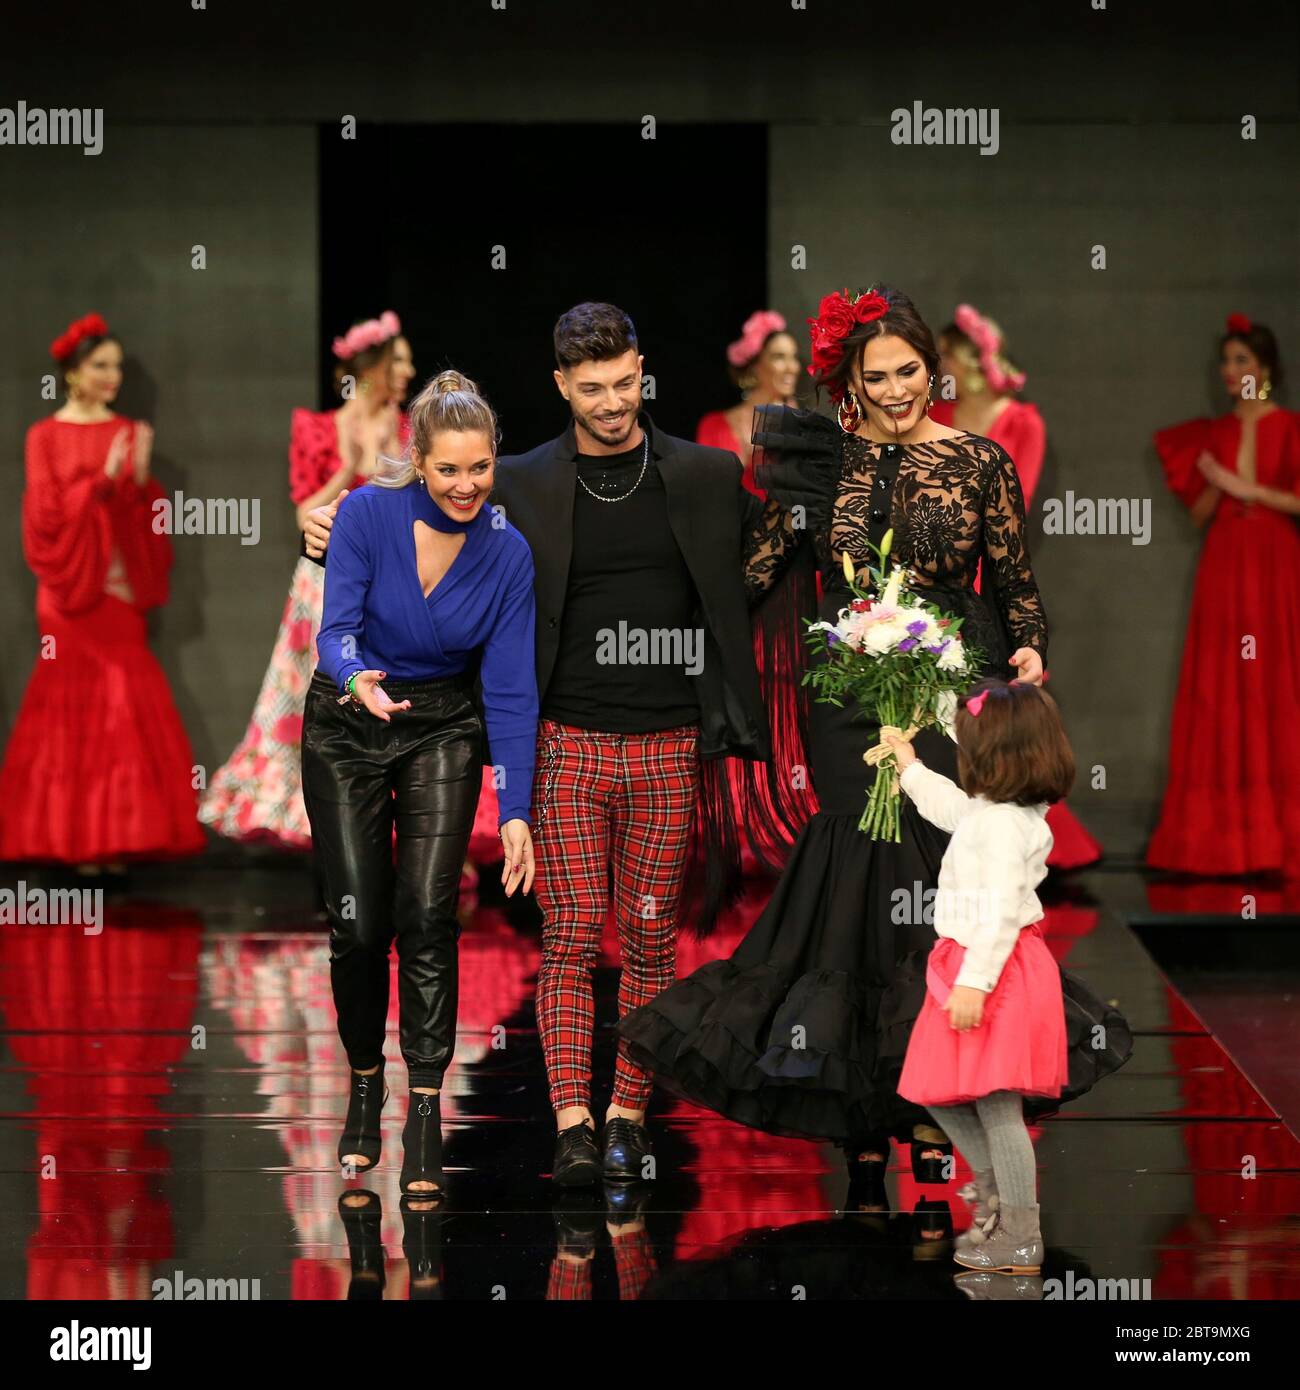 SEVILLA, SPAIN - JAN 31: Designer Adelina Infante accompanied by singer Rasel and actress Amor Romeira at the end of her Dualismo collection runway as part of the SIMOF 2020 (Photo credit: Mickael Chavet) Stock Photo